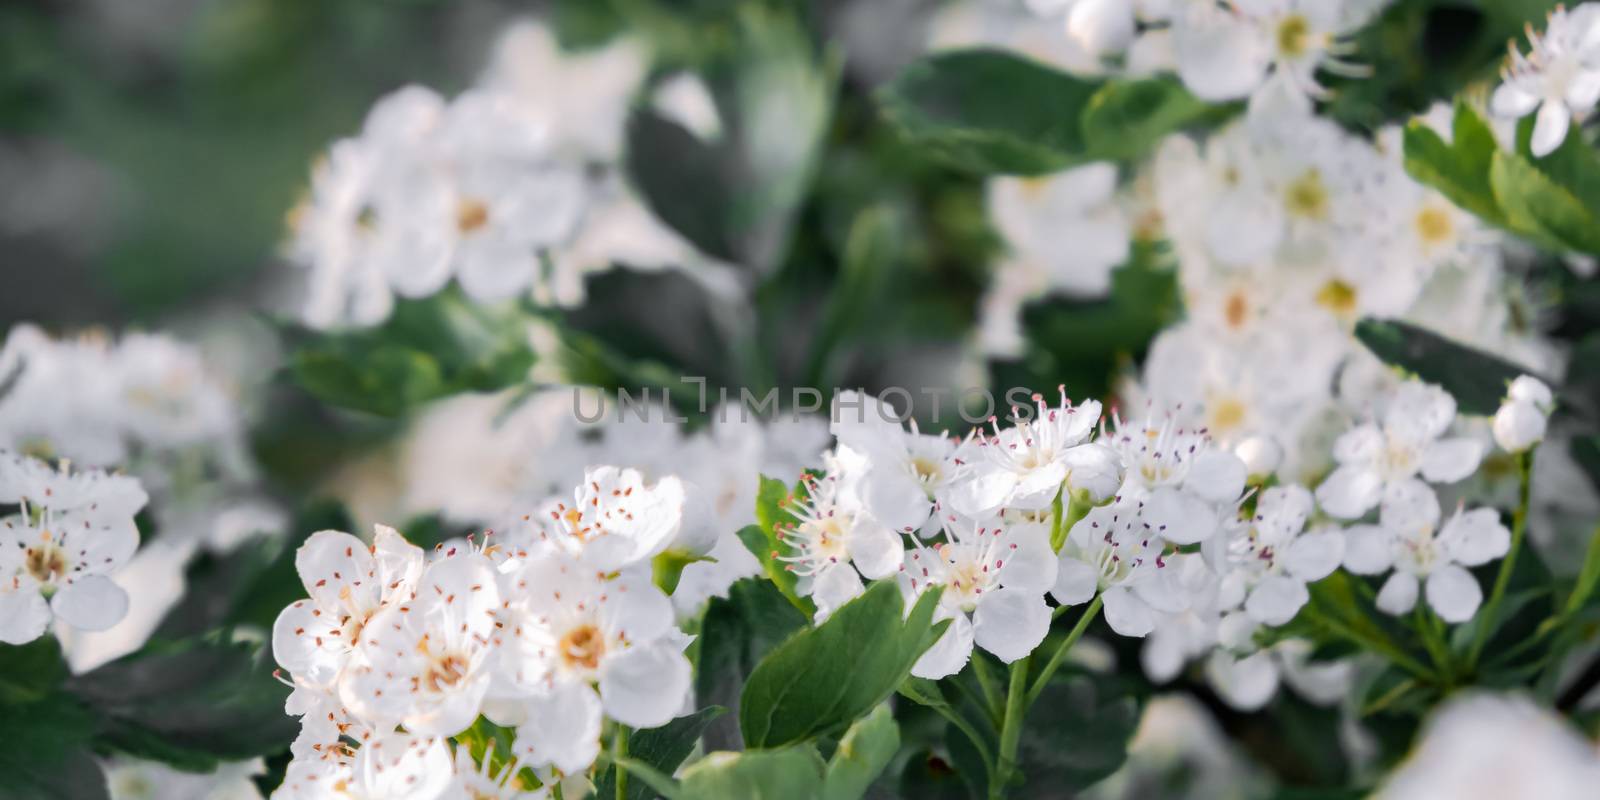 Delicate white flowers of hawthorn in the spring garden, close-up.